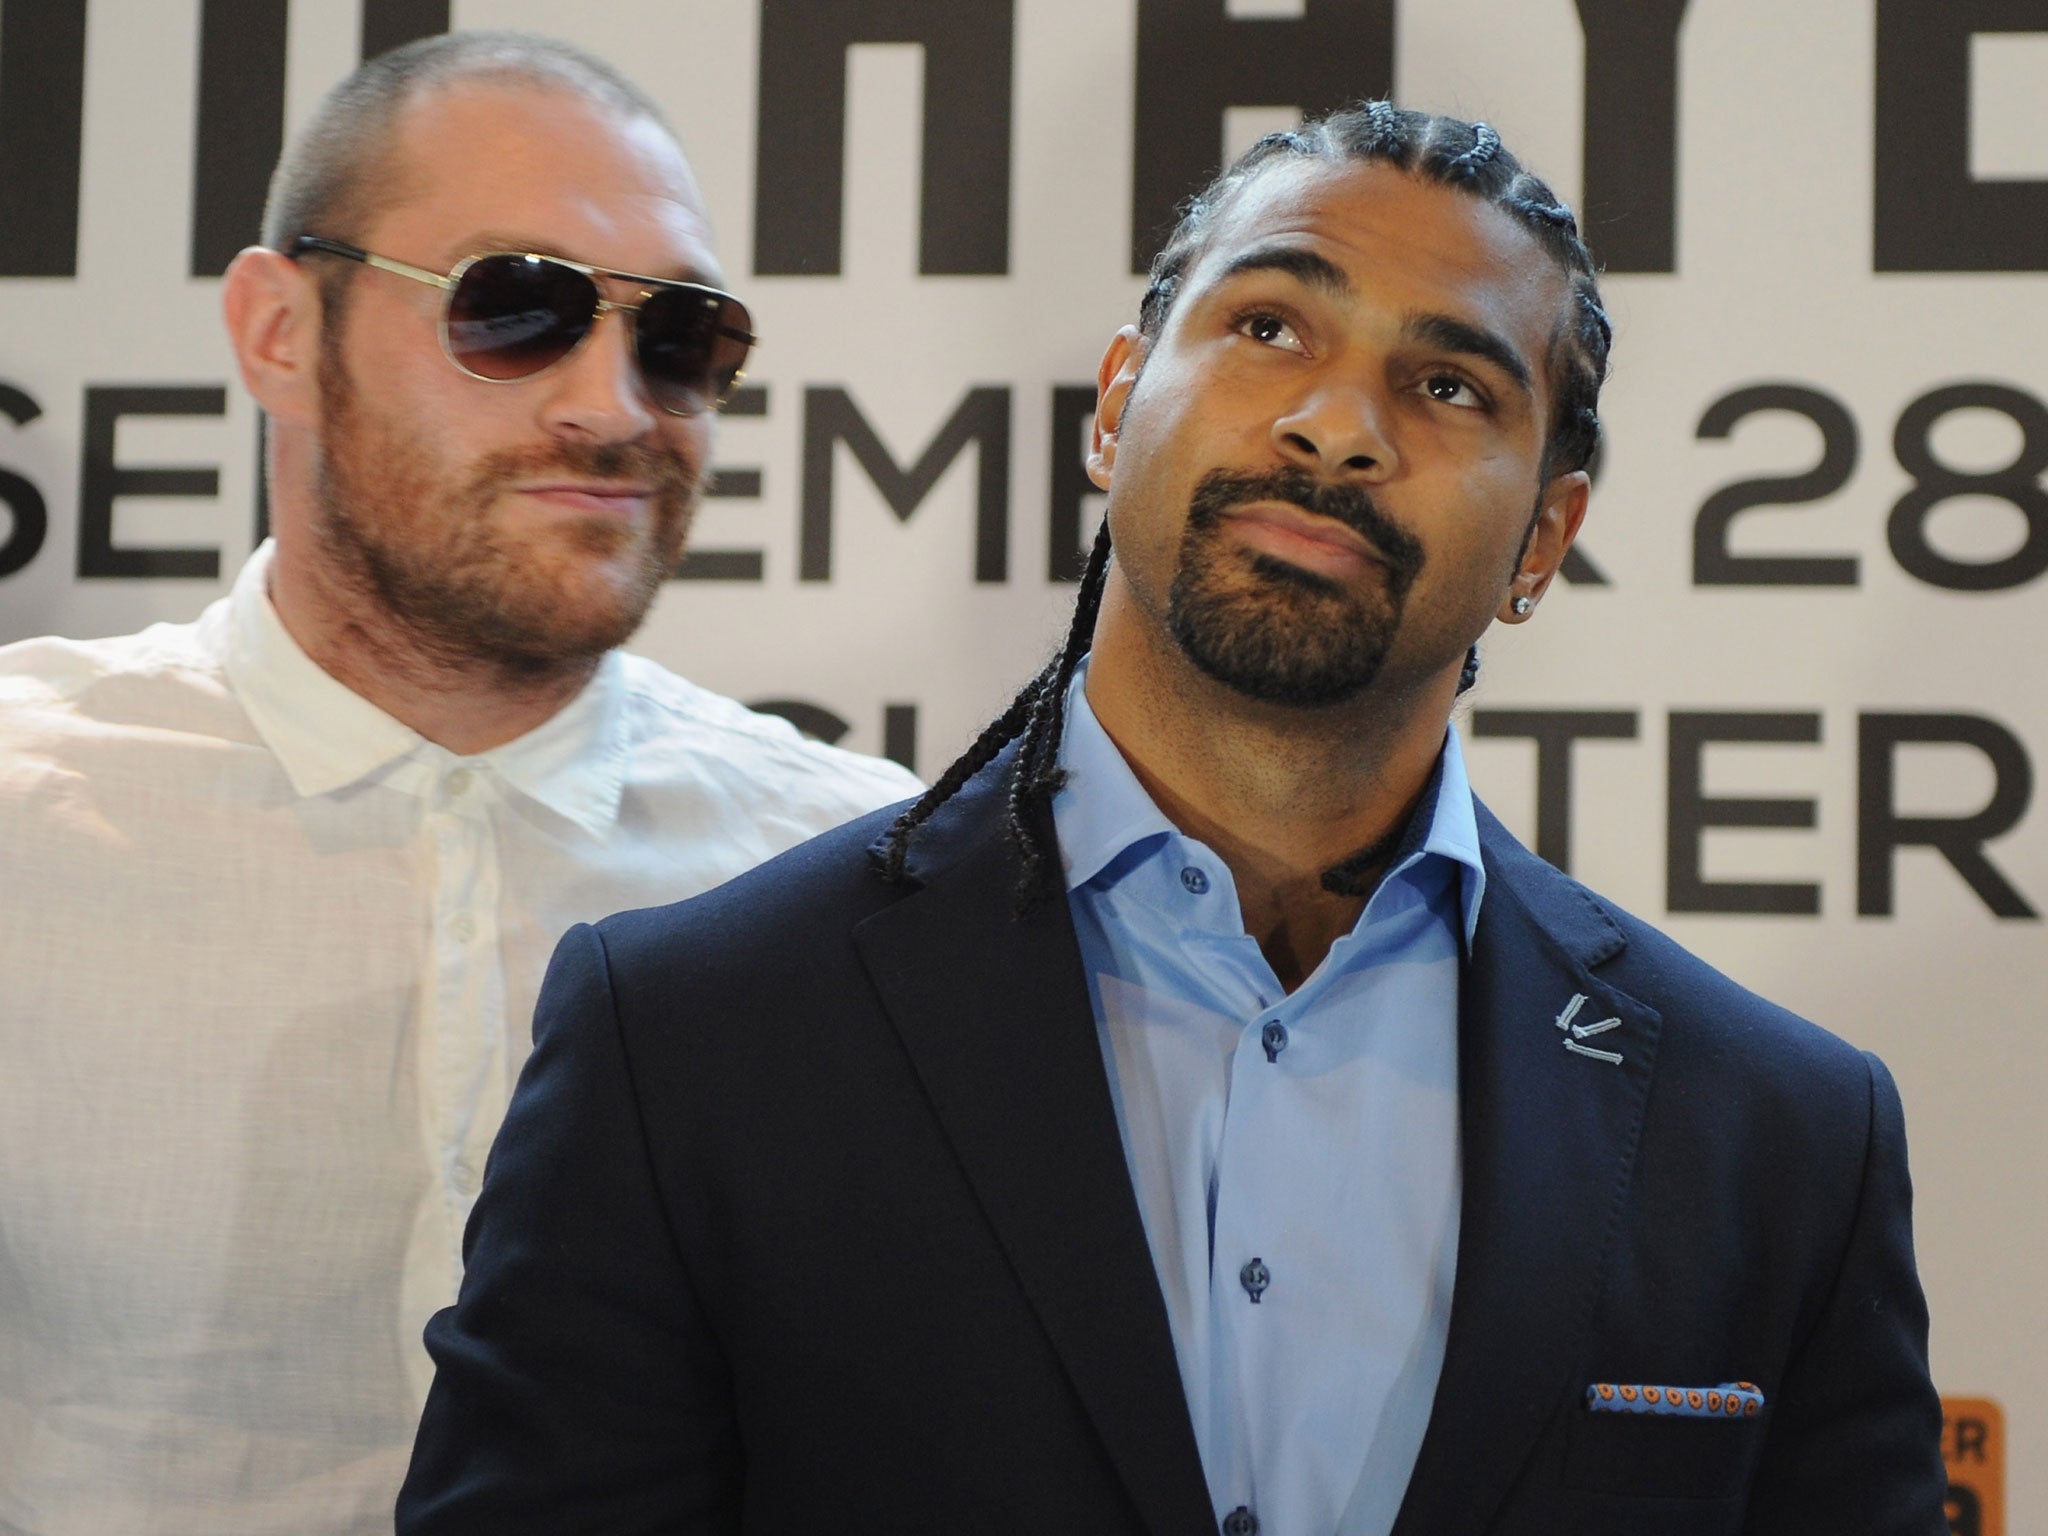 Tyson Fury, left, has his eyes on a match with David Haye